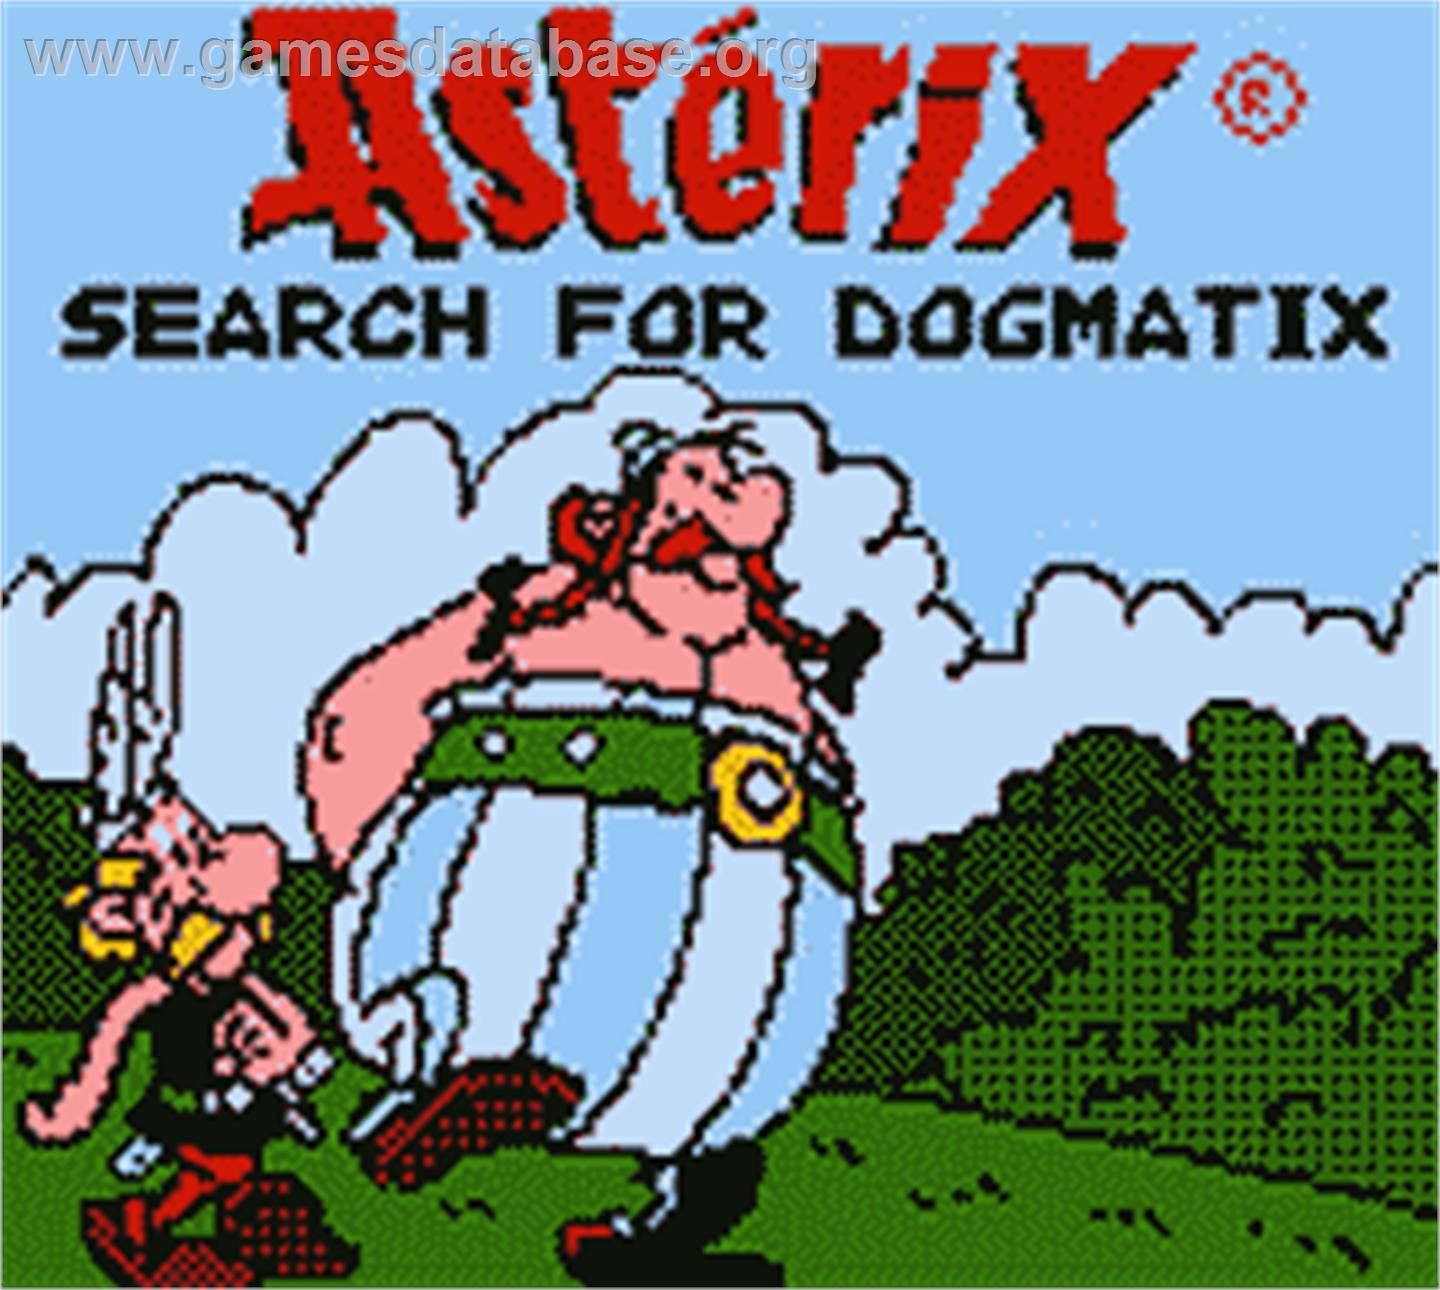 Asterix: Search for Dogmatix - Nintendo Game Boy Color - Artwork - Title Screen